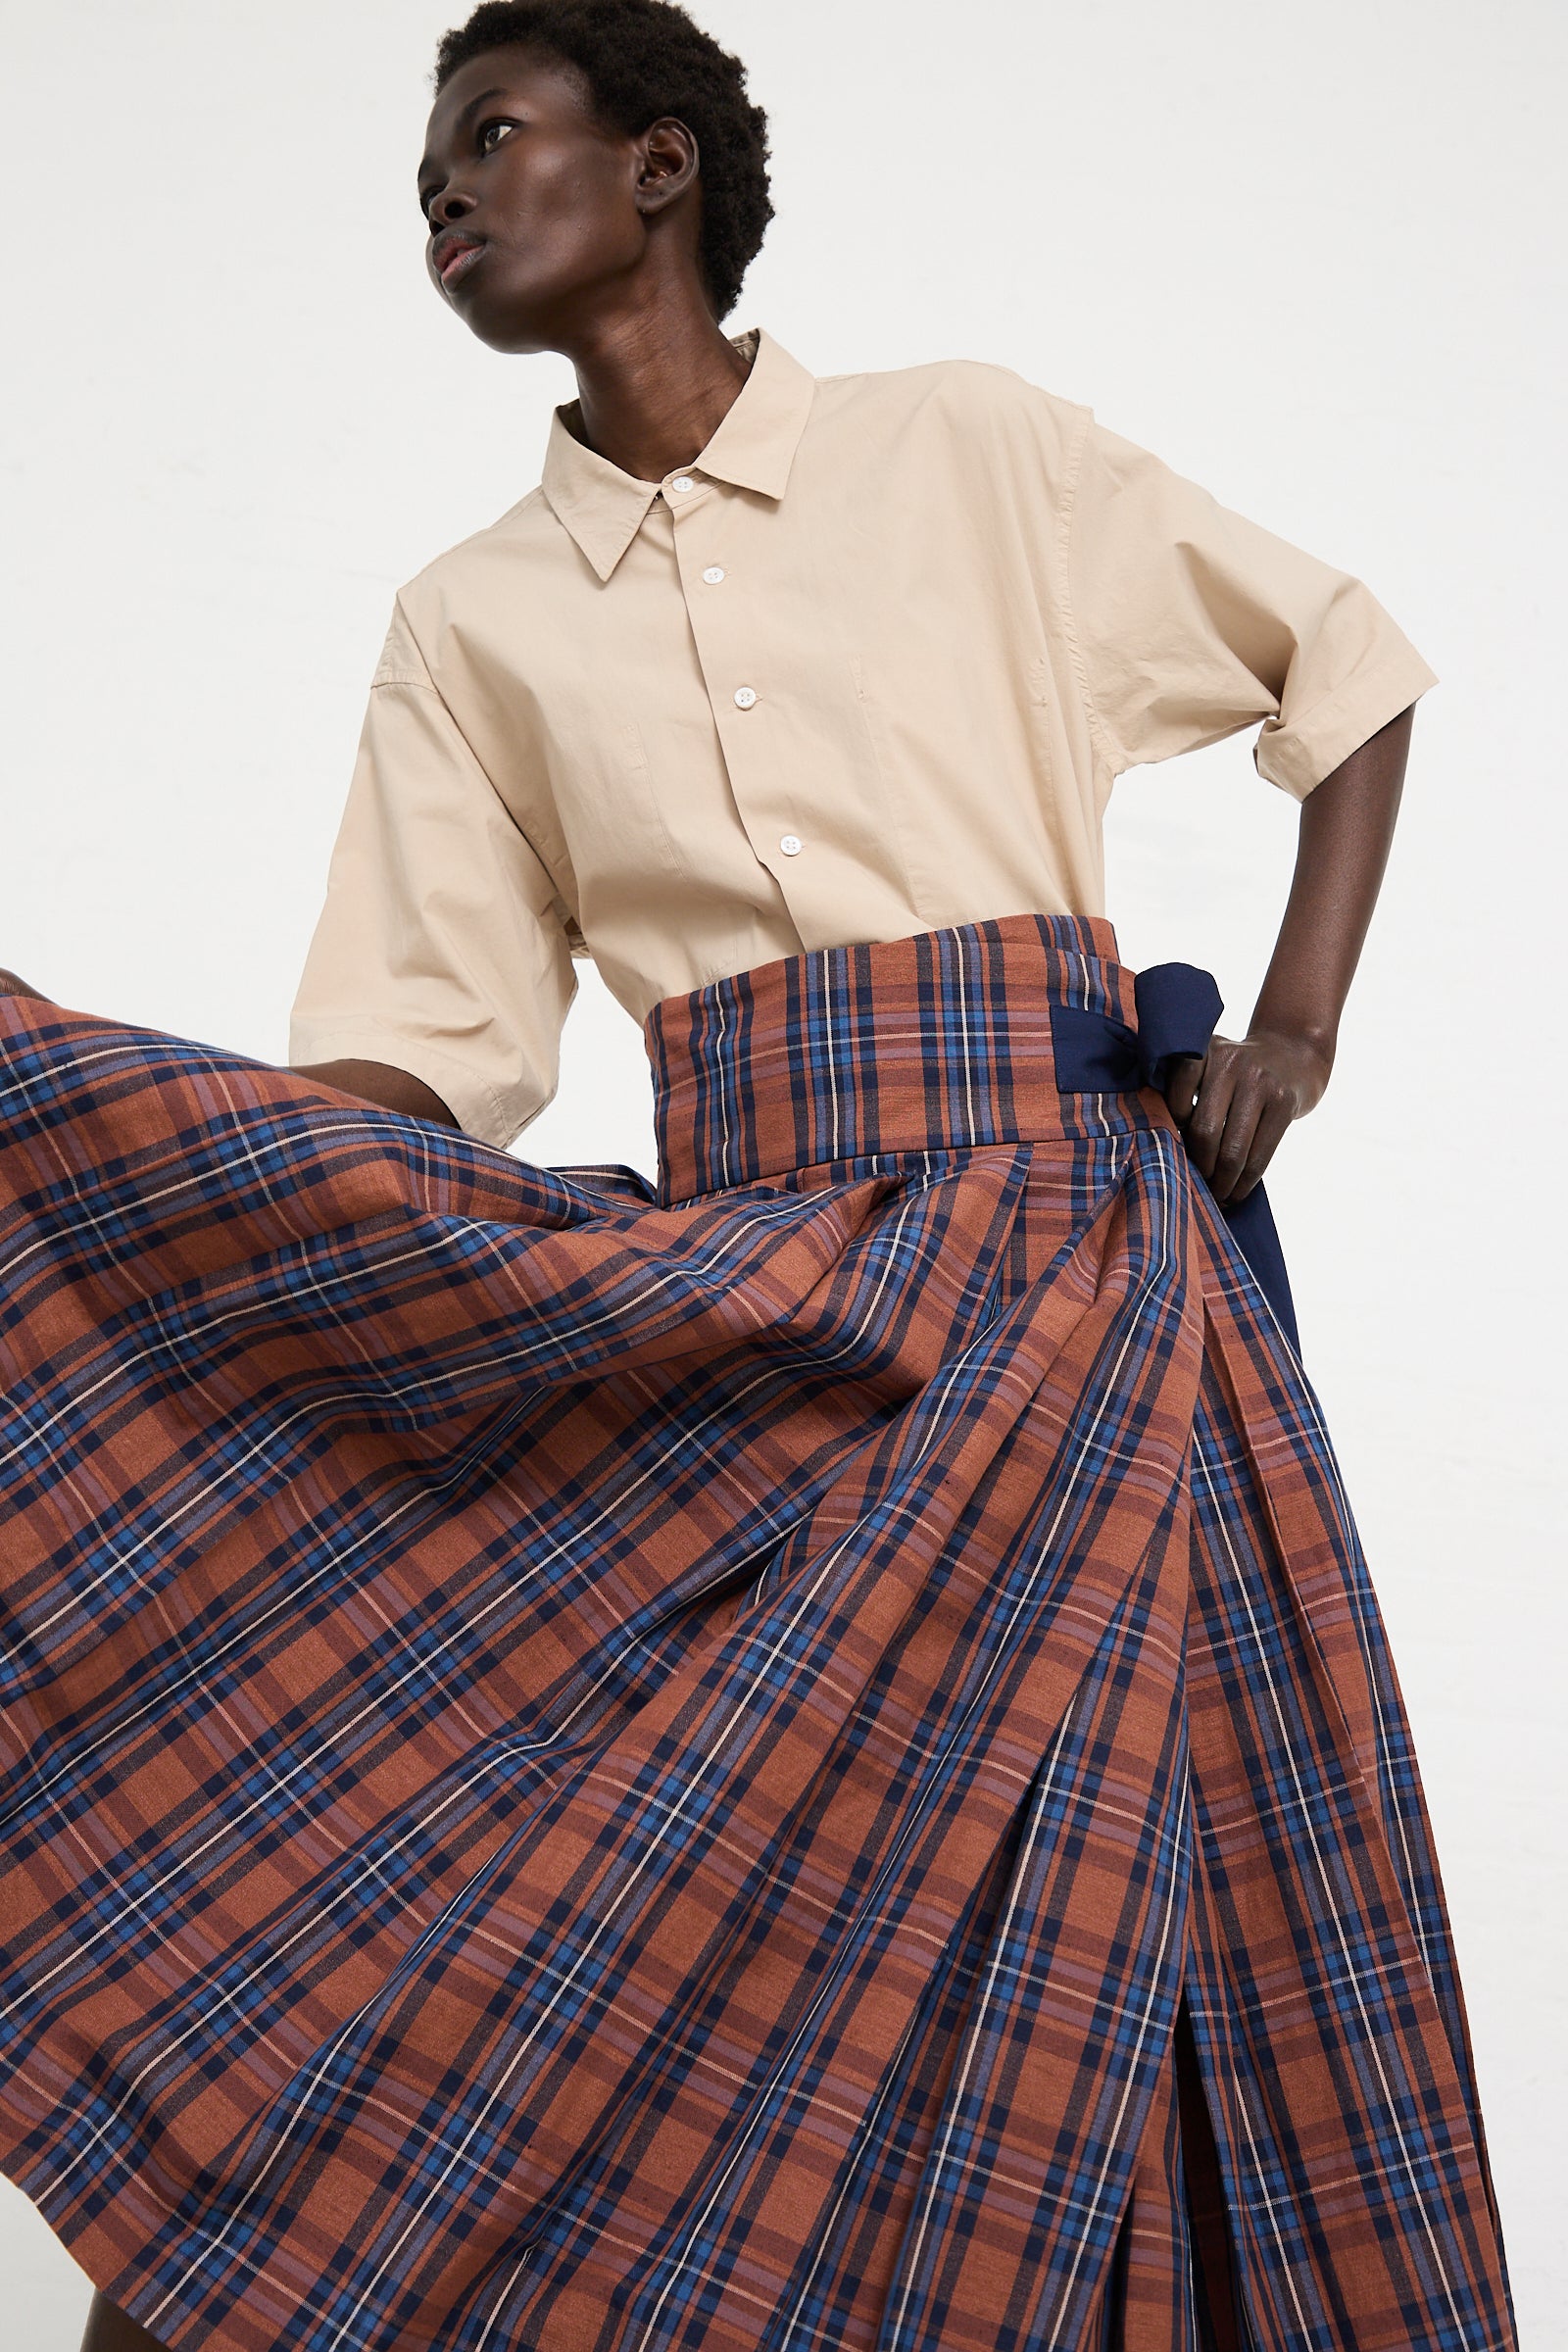 A person wearing a light beige short-sleeve button-up shirt and a Toujours Cotton Linen Madras Plaid Cloth Pleated Wrap Maxi Skirt in Brick posed against a plain white background.